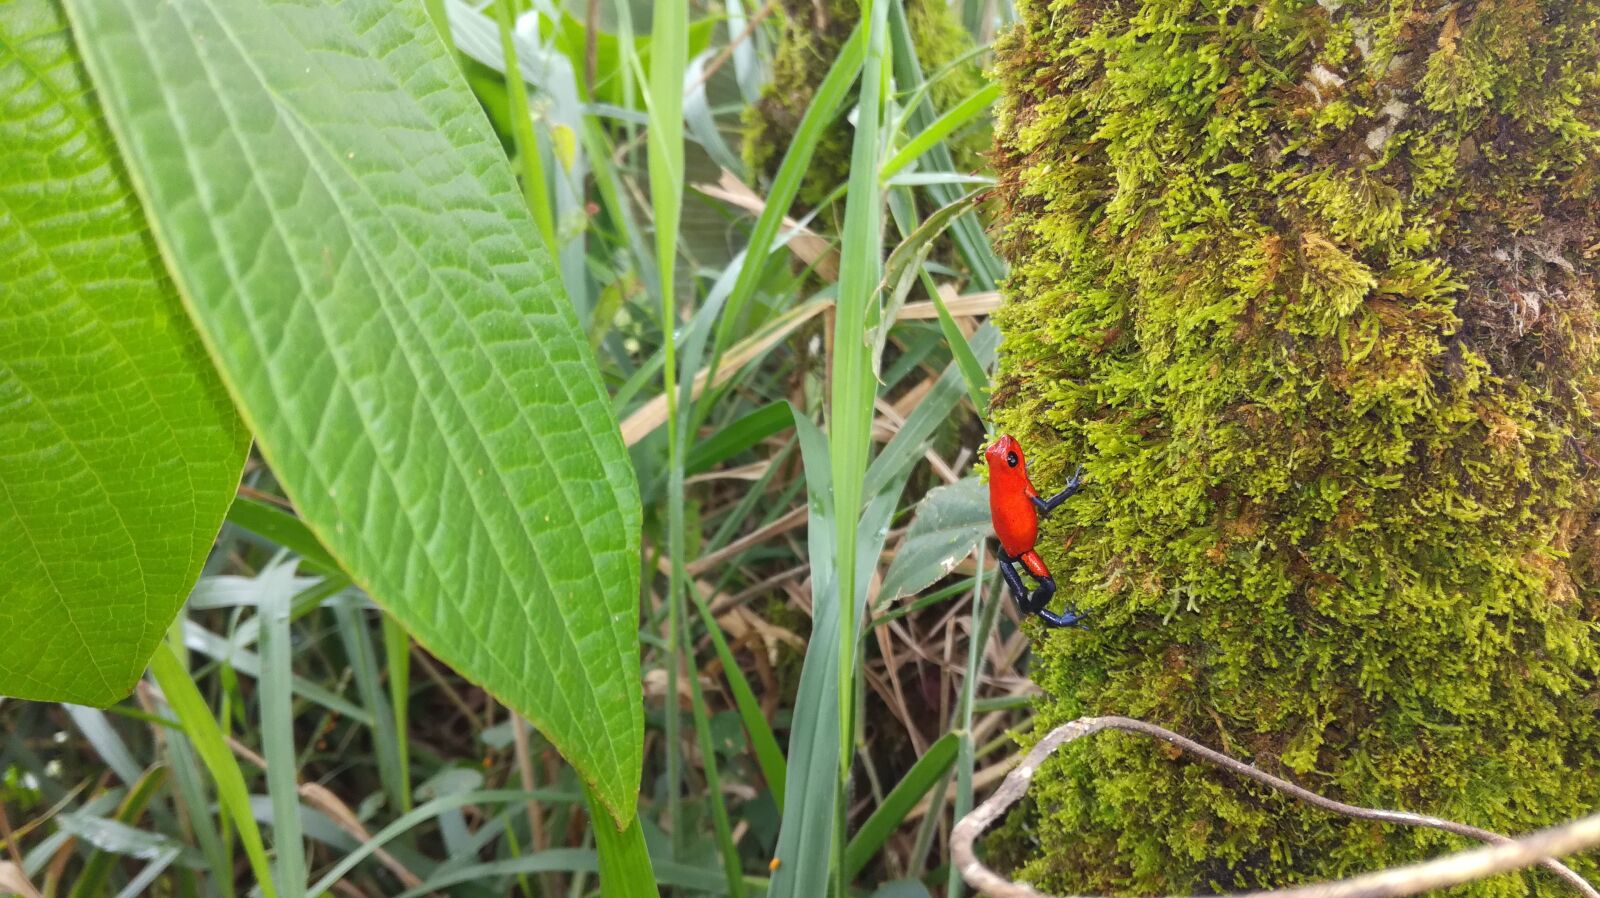 HUAWEI GT3 sample photo. Costa rica, encourages, insect photography